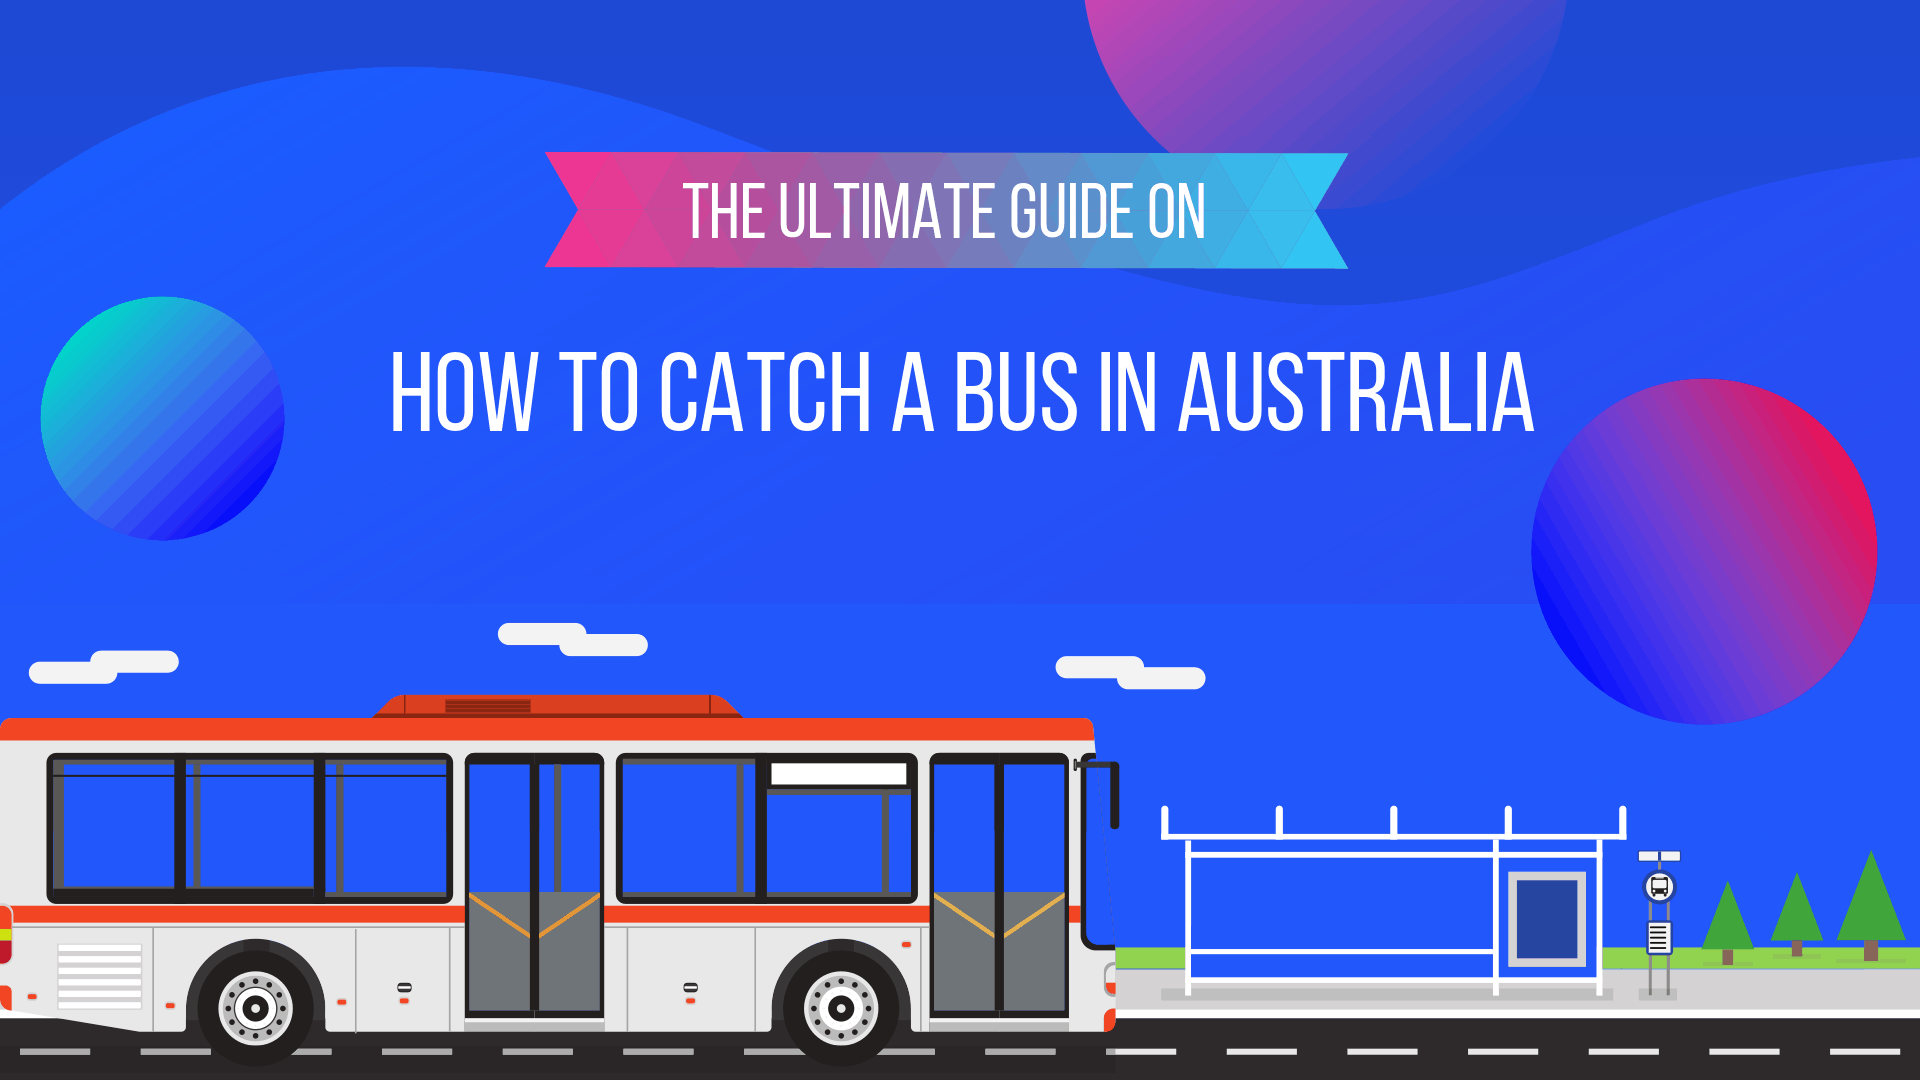 The ultimate guide on how to catch a bus